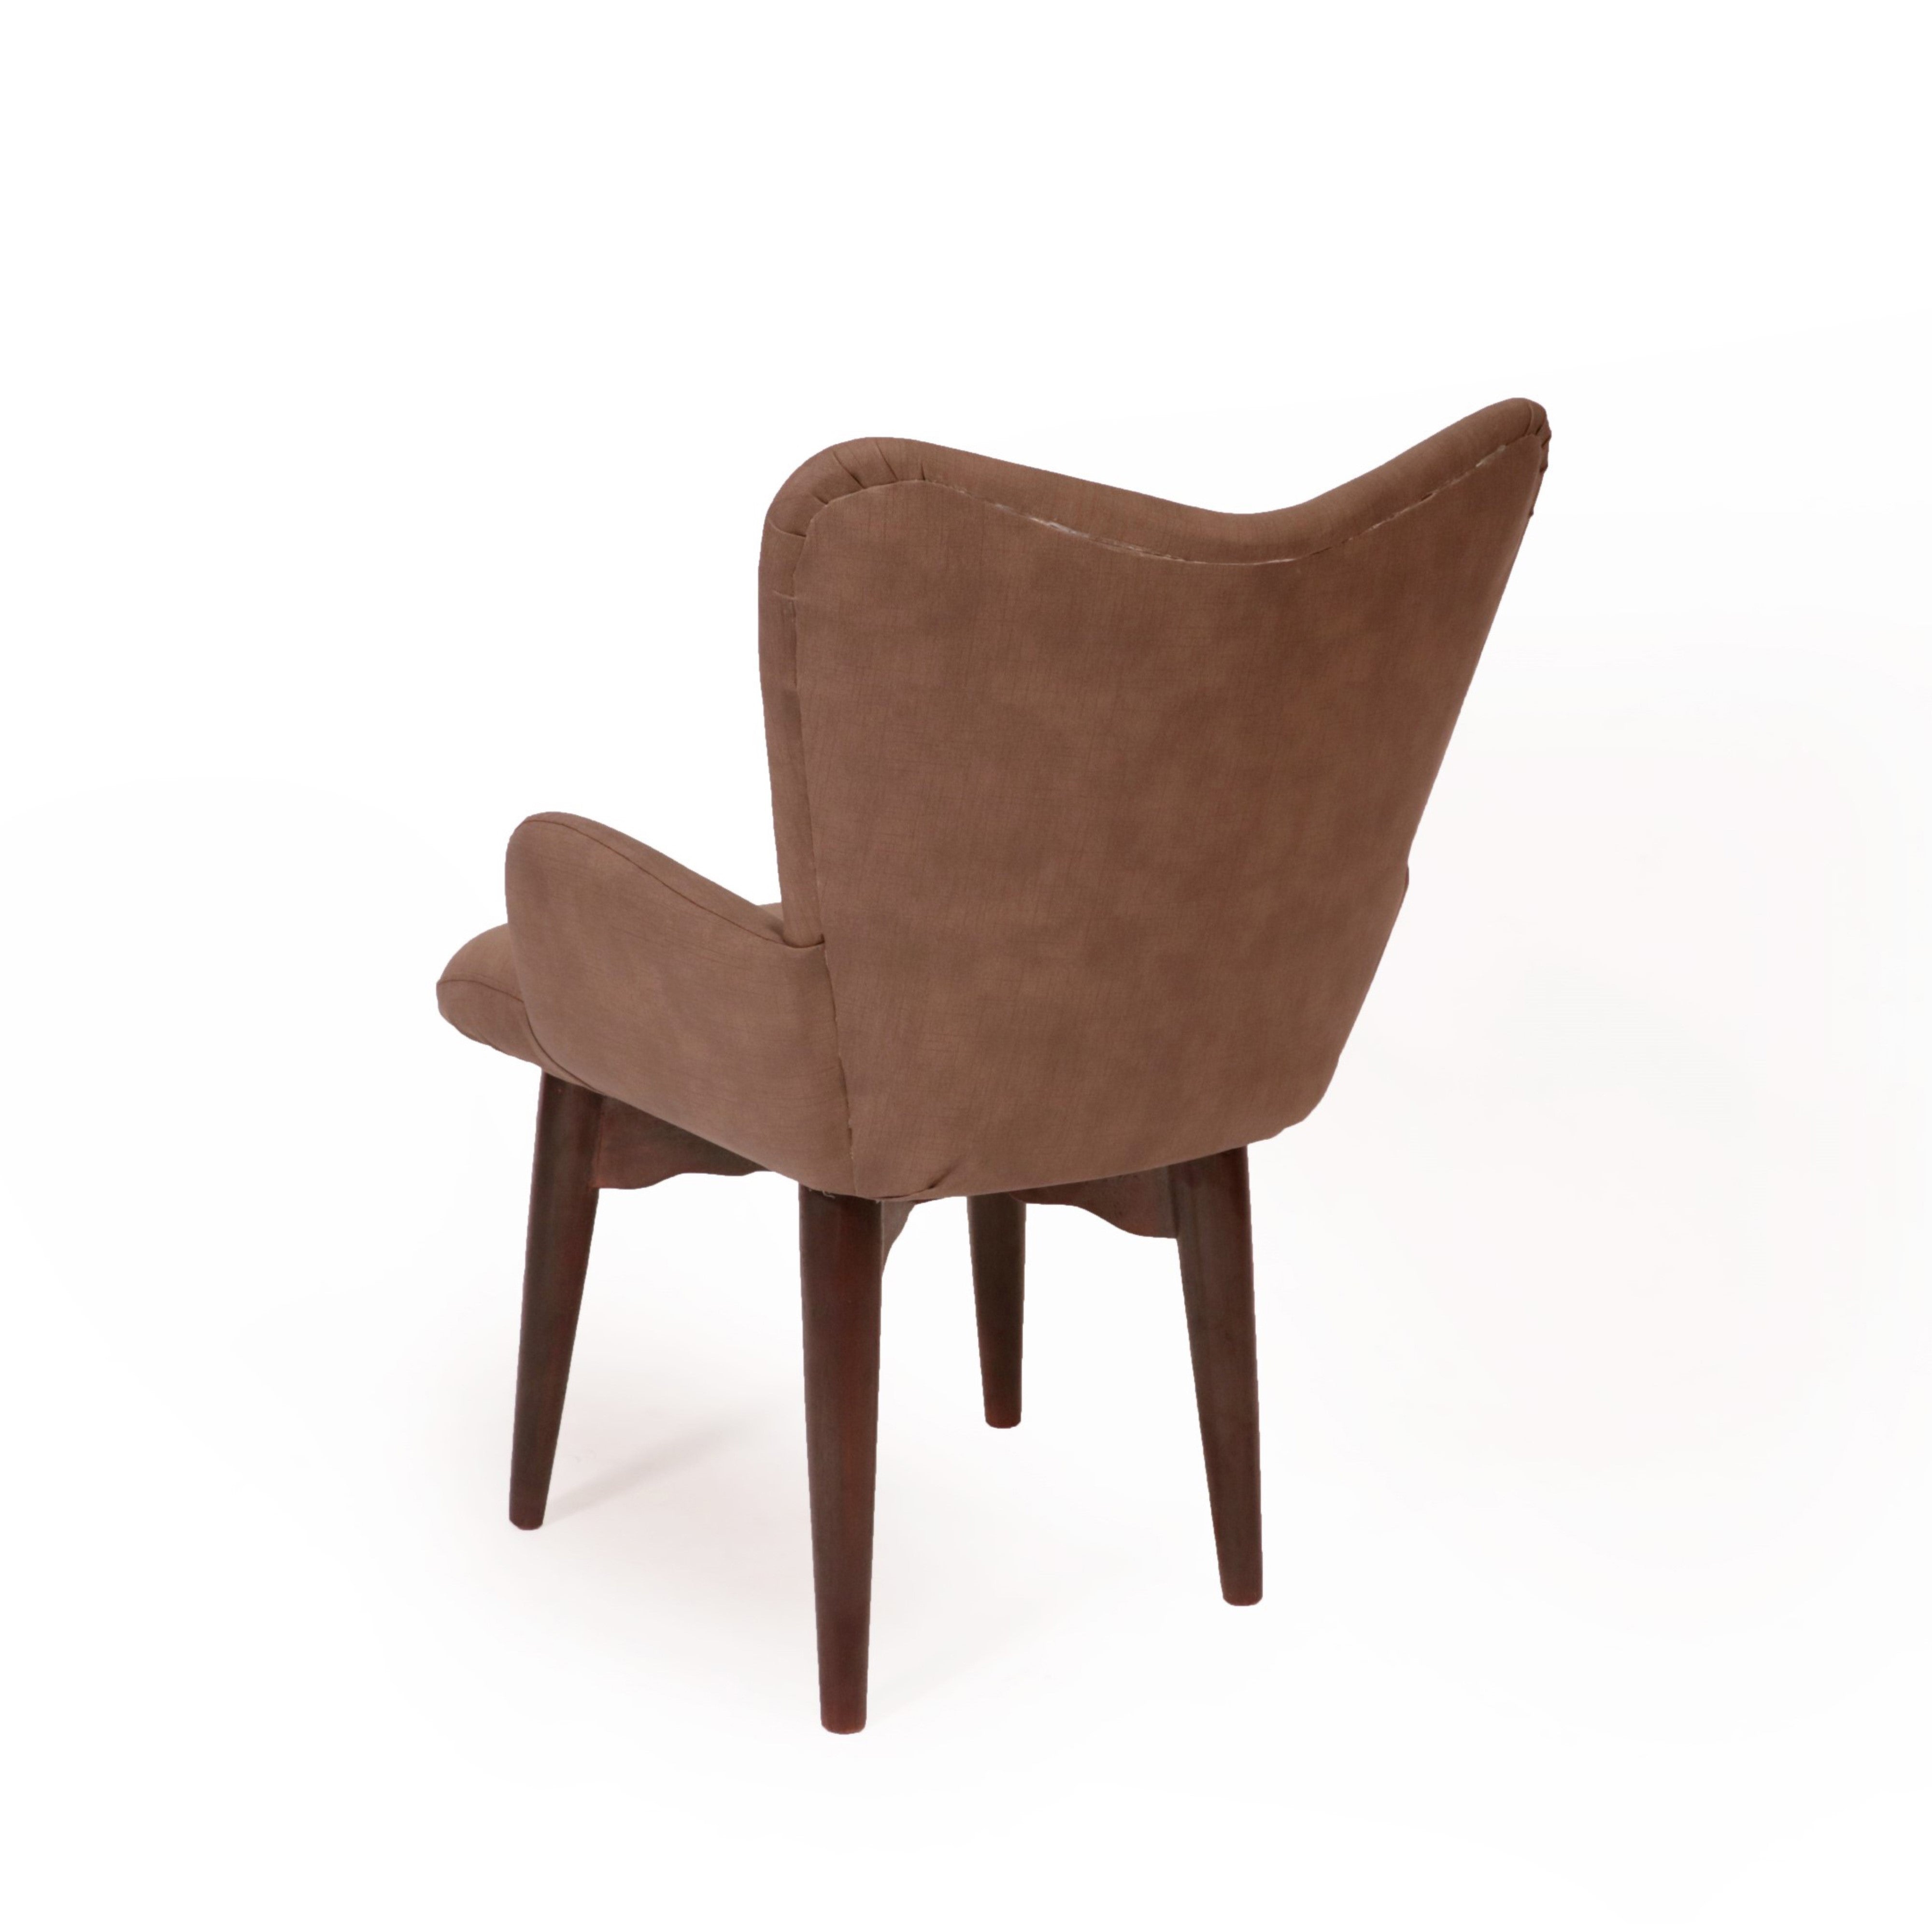 Upholstered Contemporary Chair Arm Chair